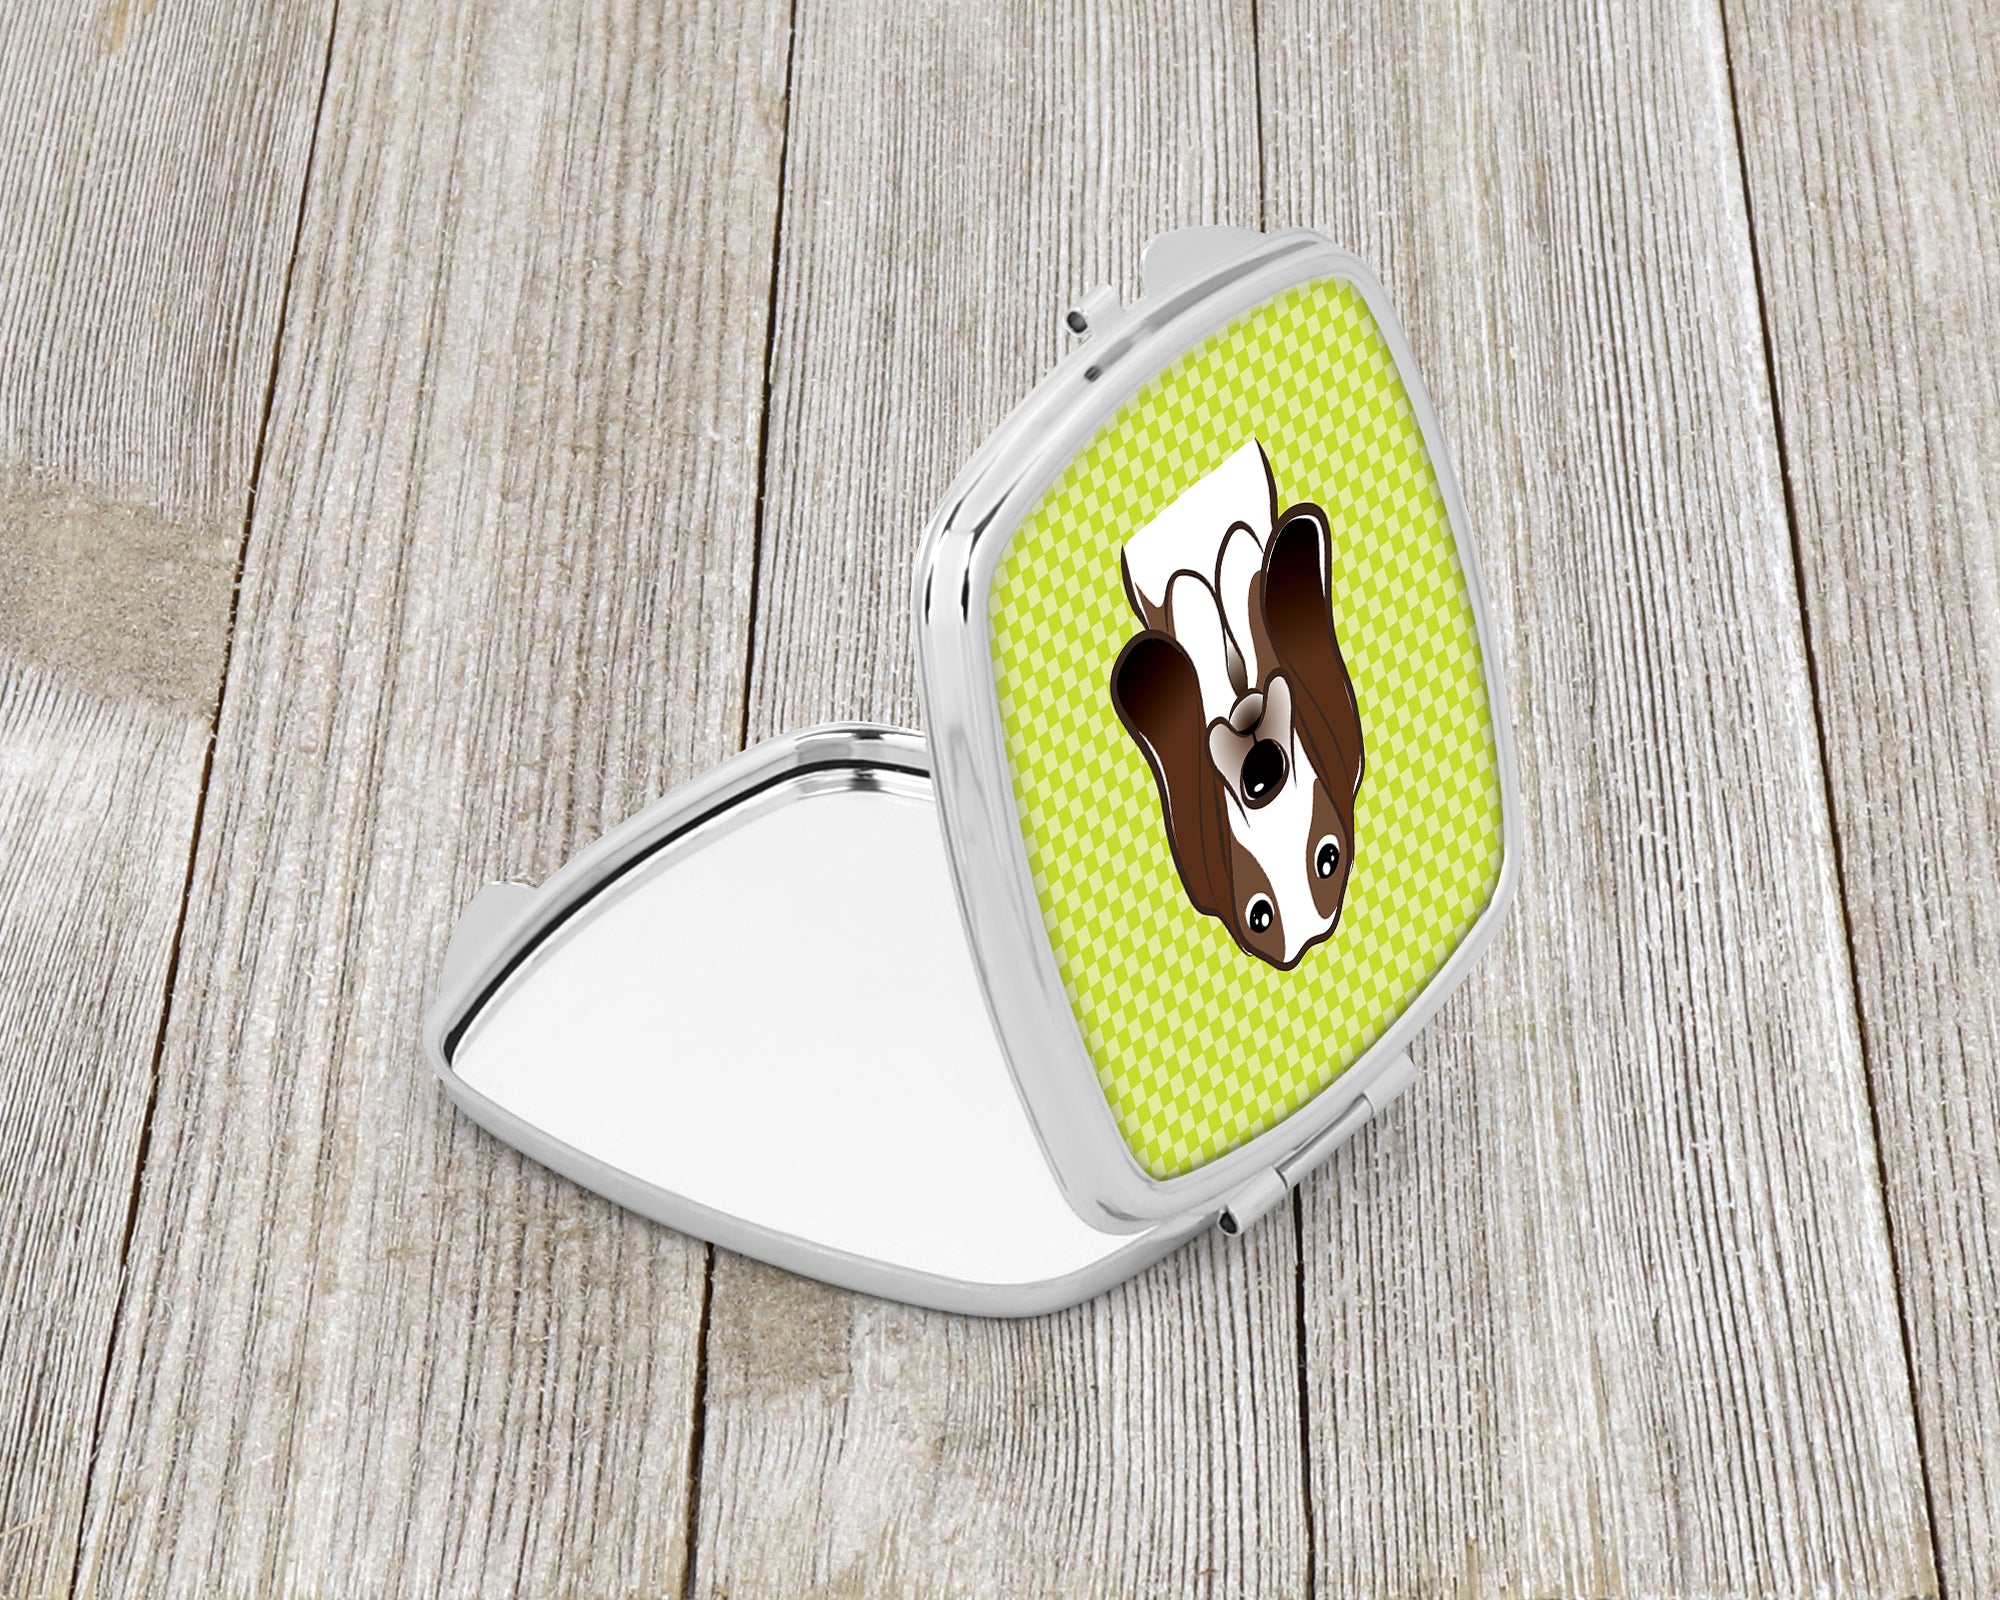 Checkerboard Lime Green Basset Hound Compact Mirror BB1305SCM  the-store.com.